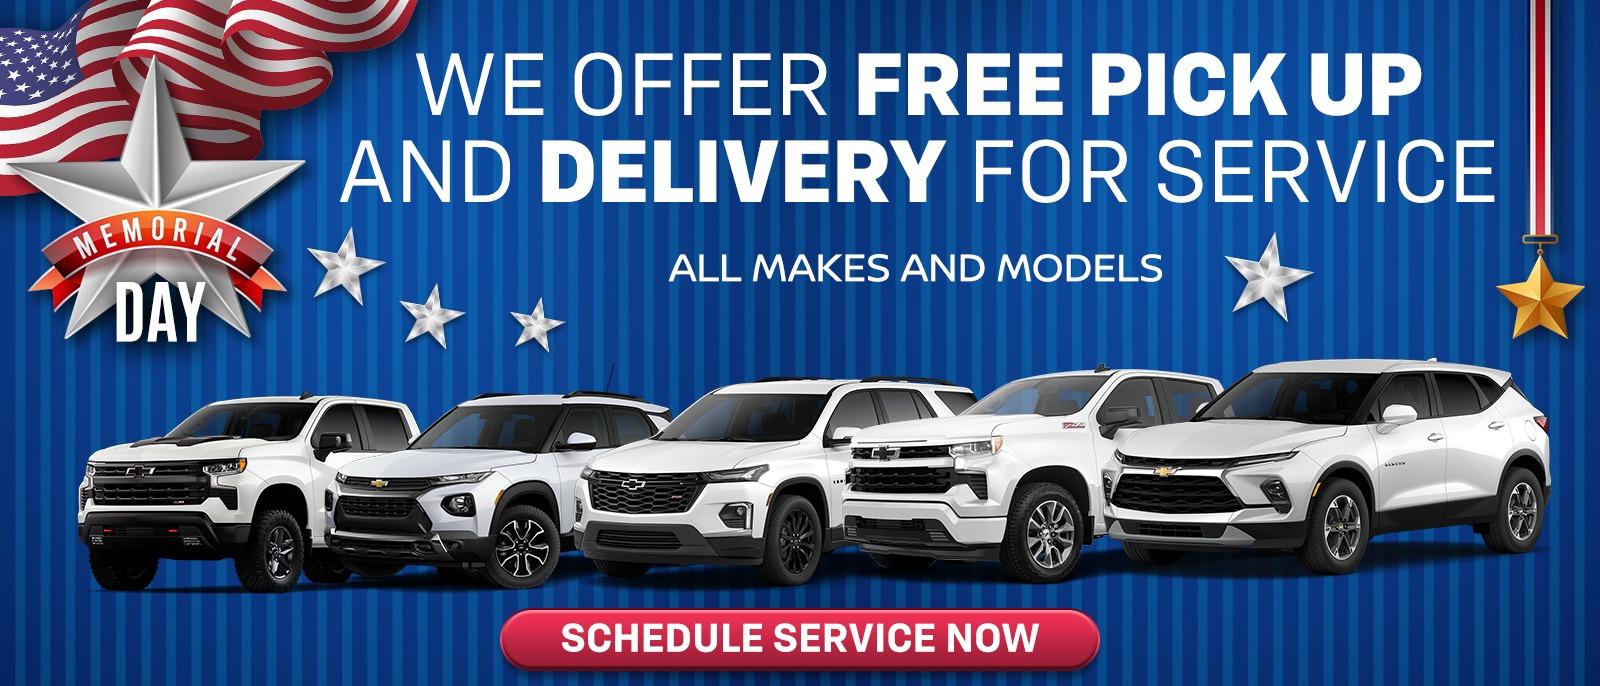 We offer free pick up and Delivery for service
all makes and models